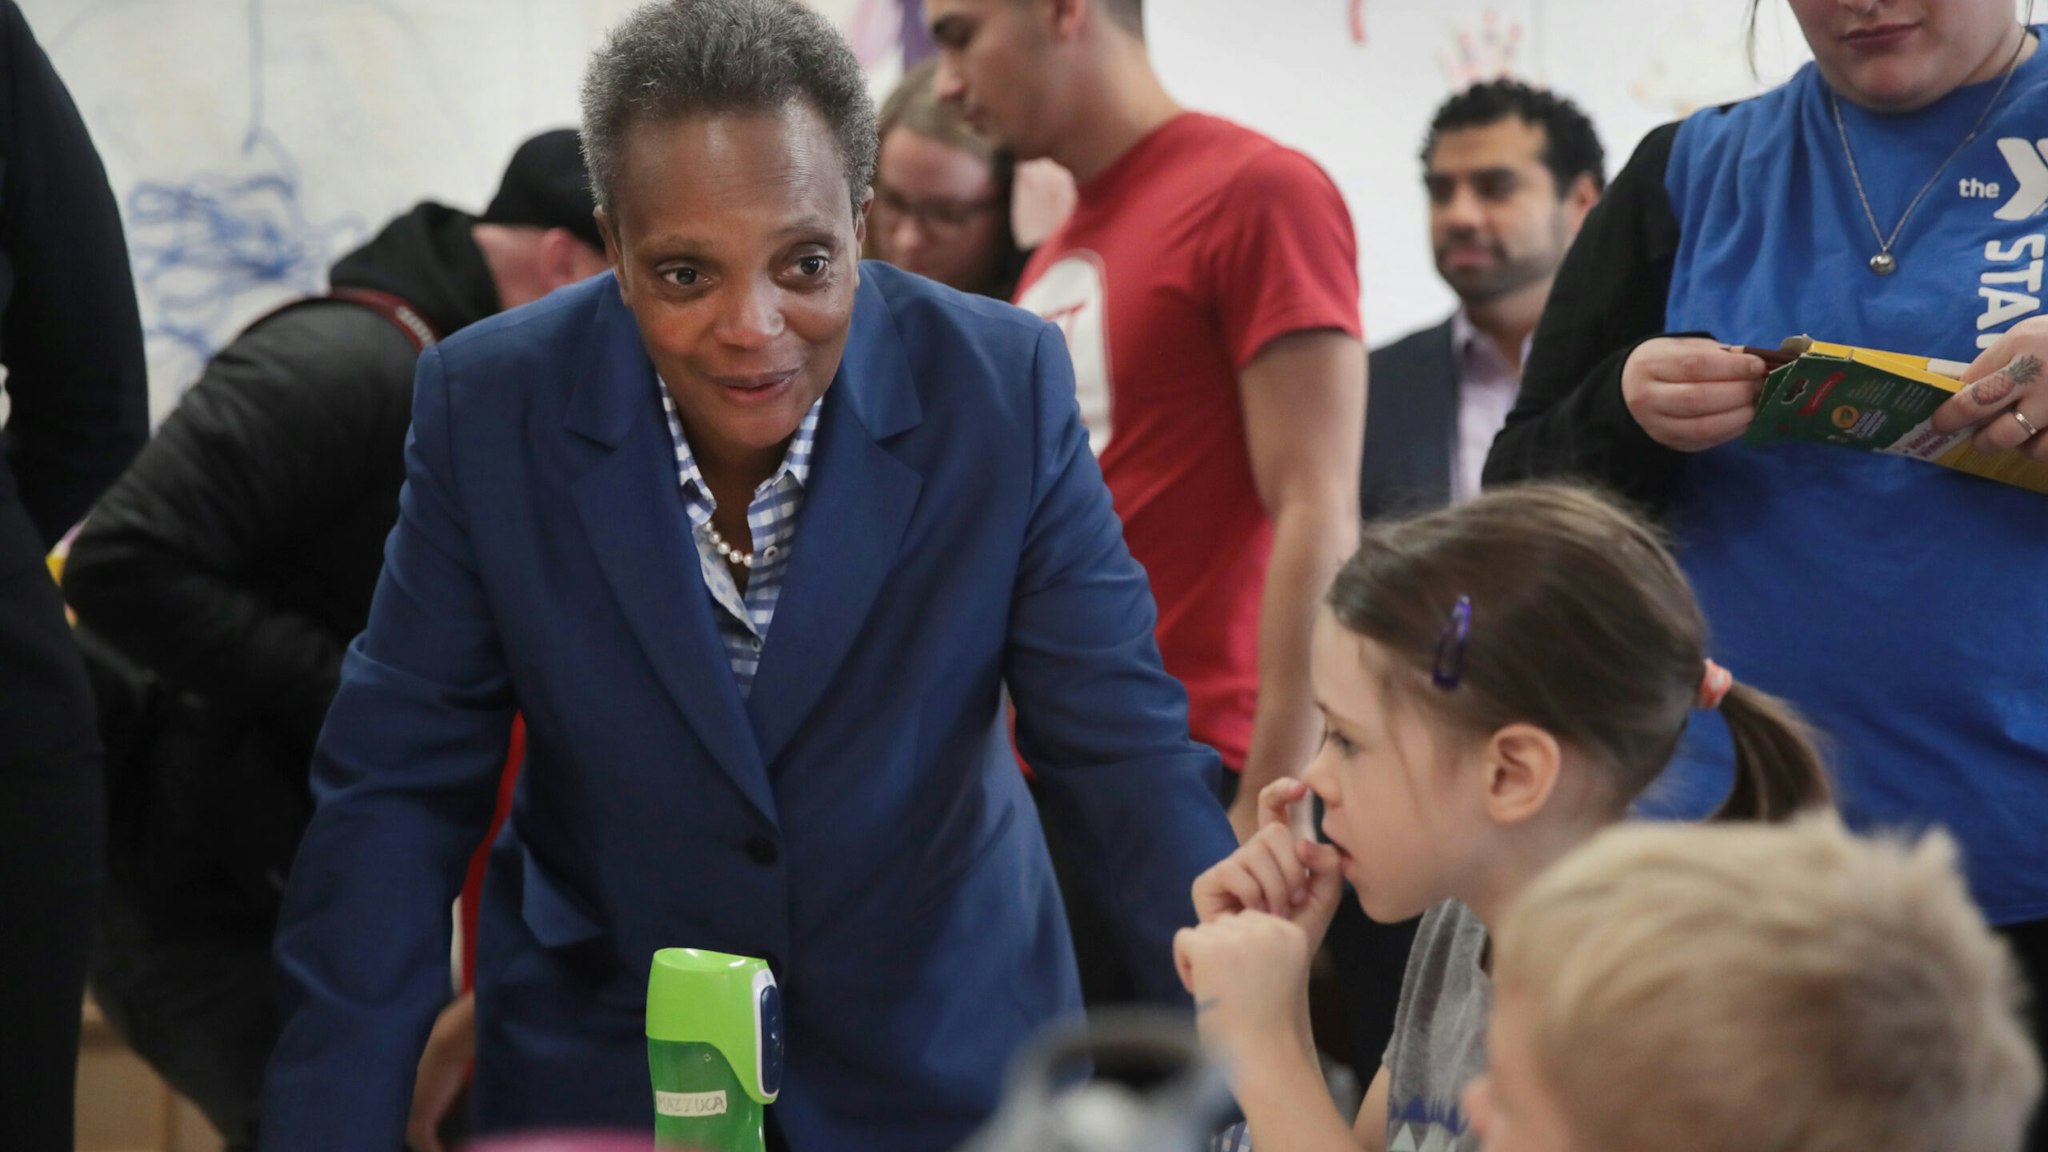 CHICAGO, ILLINOIS - OCTOBER 17: Chicago Mayor Lori Lightfoot visits with children affected by the teachers' strike at the McCormick YMCA on October 17, 2019 in Chicago, Illinois. About 25,000 Chicago school teachers went on strike today after the Chicago Teachers Union (CTU) failed to reach a contract agreement with the city, leaving 300.000 students searching for alternative ways to spend their day. Chicago has the third largest public school system in the nation. (Photo by Scott Olson/Getty Images)